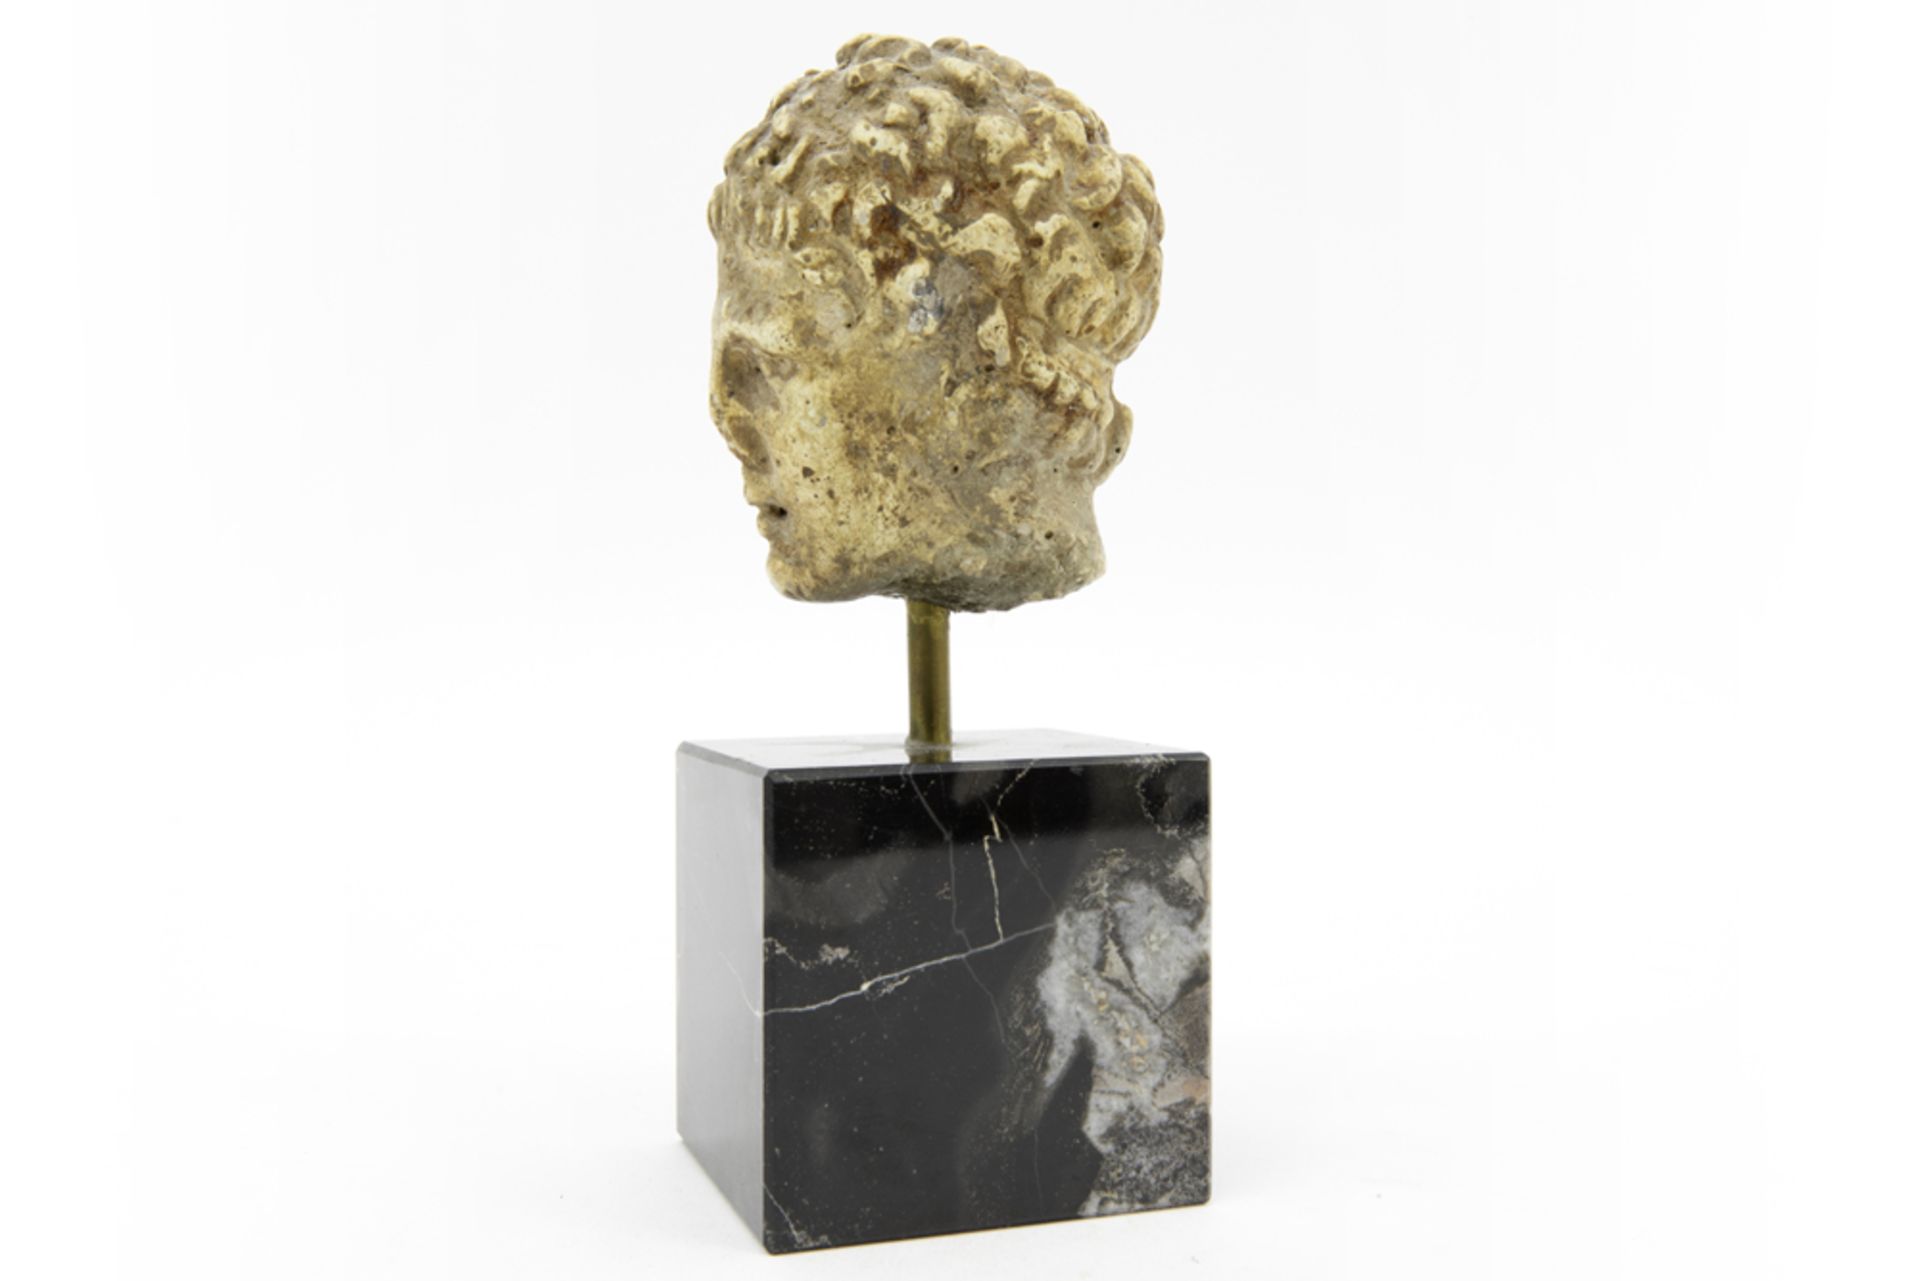 4th till 2nd century BC Ancient Greece Macedonian fragment of a stone sculpture depicting the head - Image 2 of 4